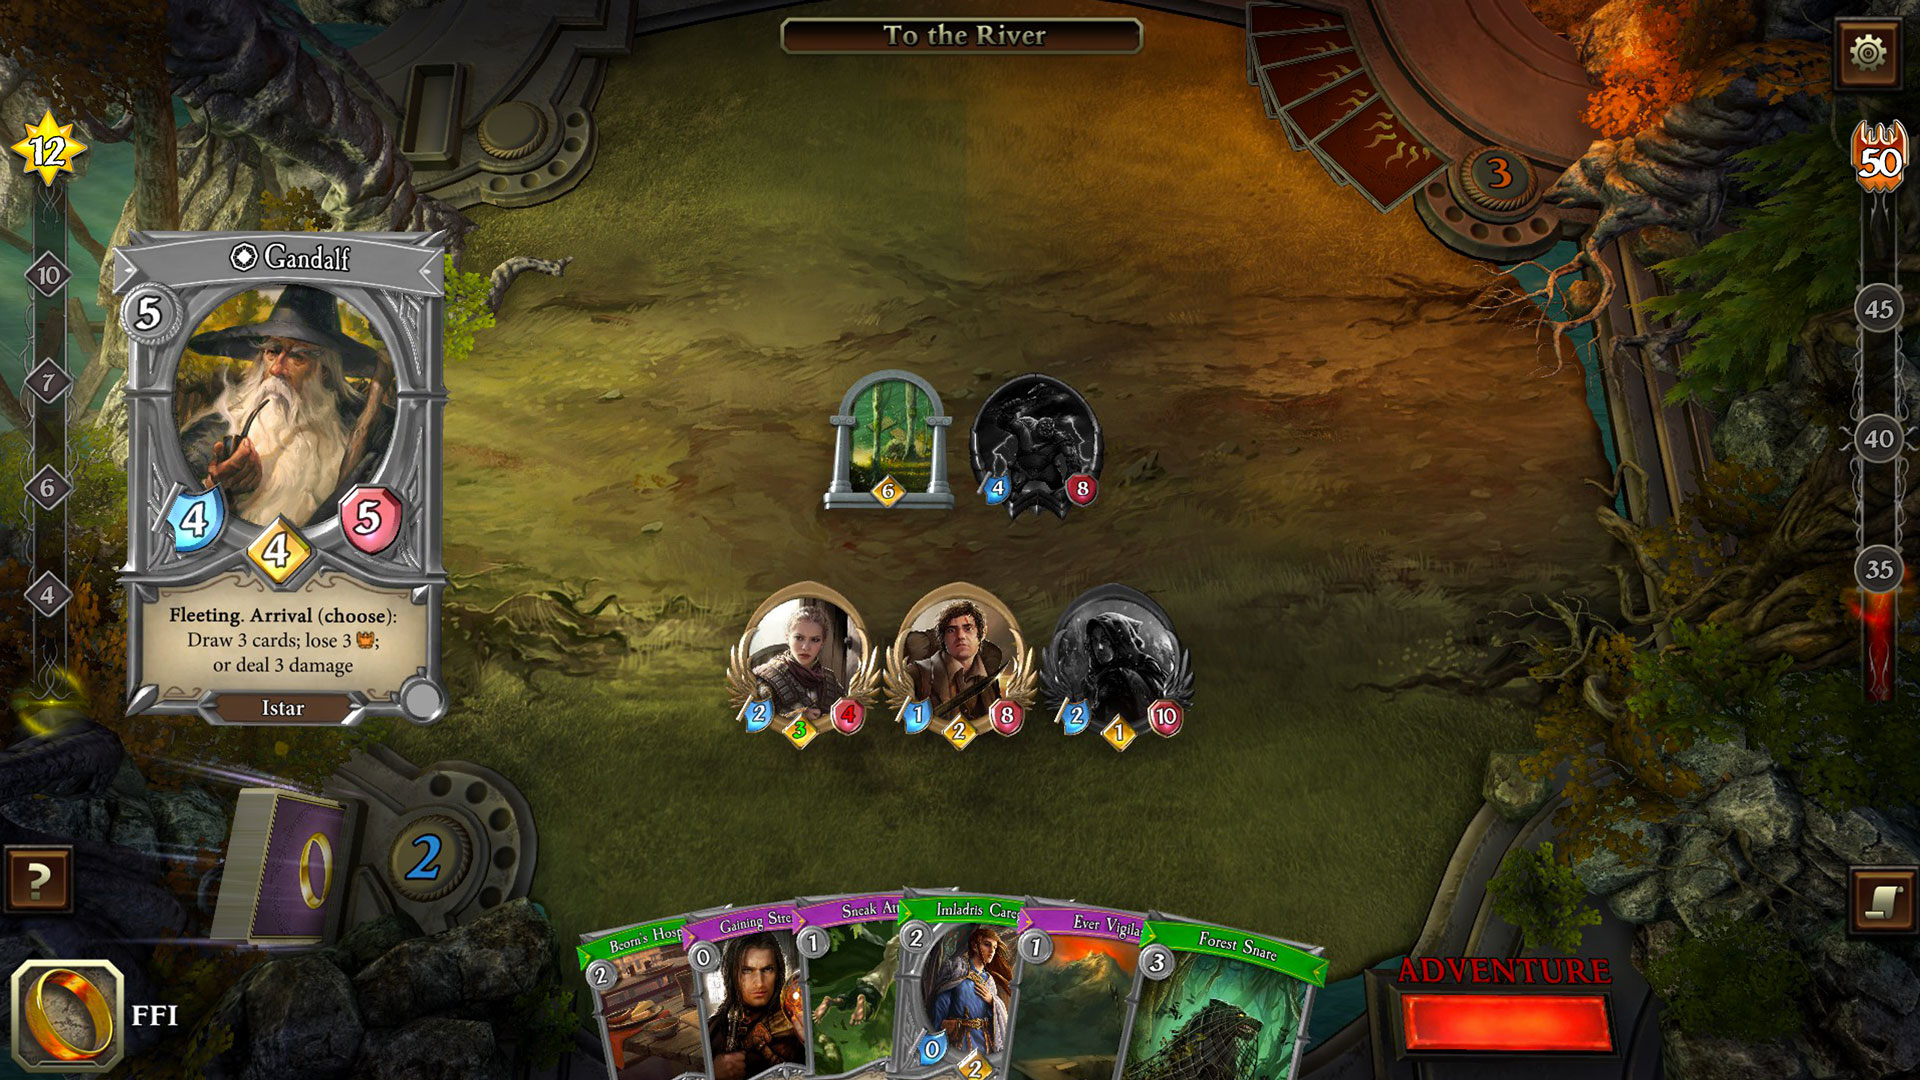 The Lord of the Rings: Adventure Card Game in arrivo ad Agosto su Nintendo Switch